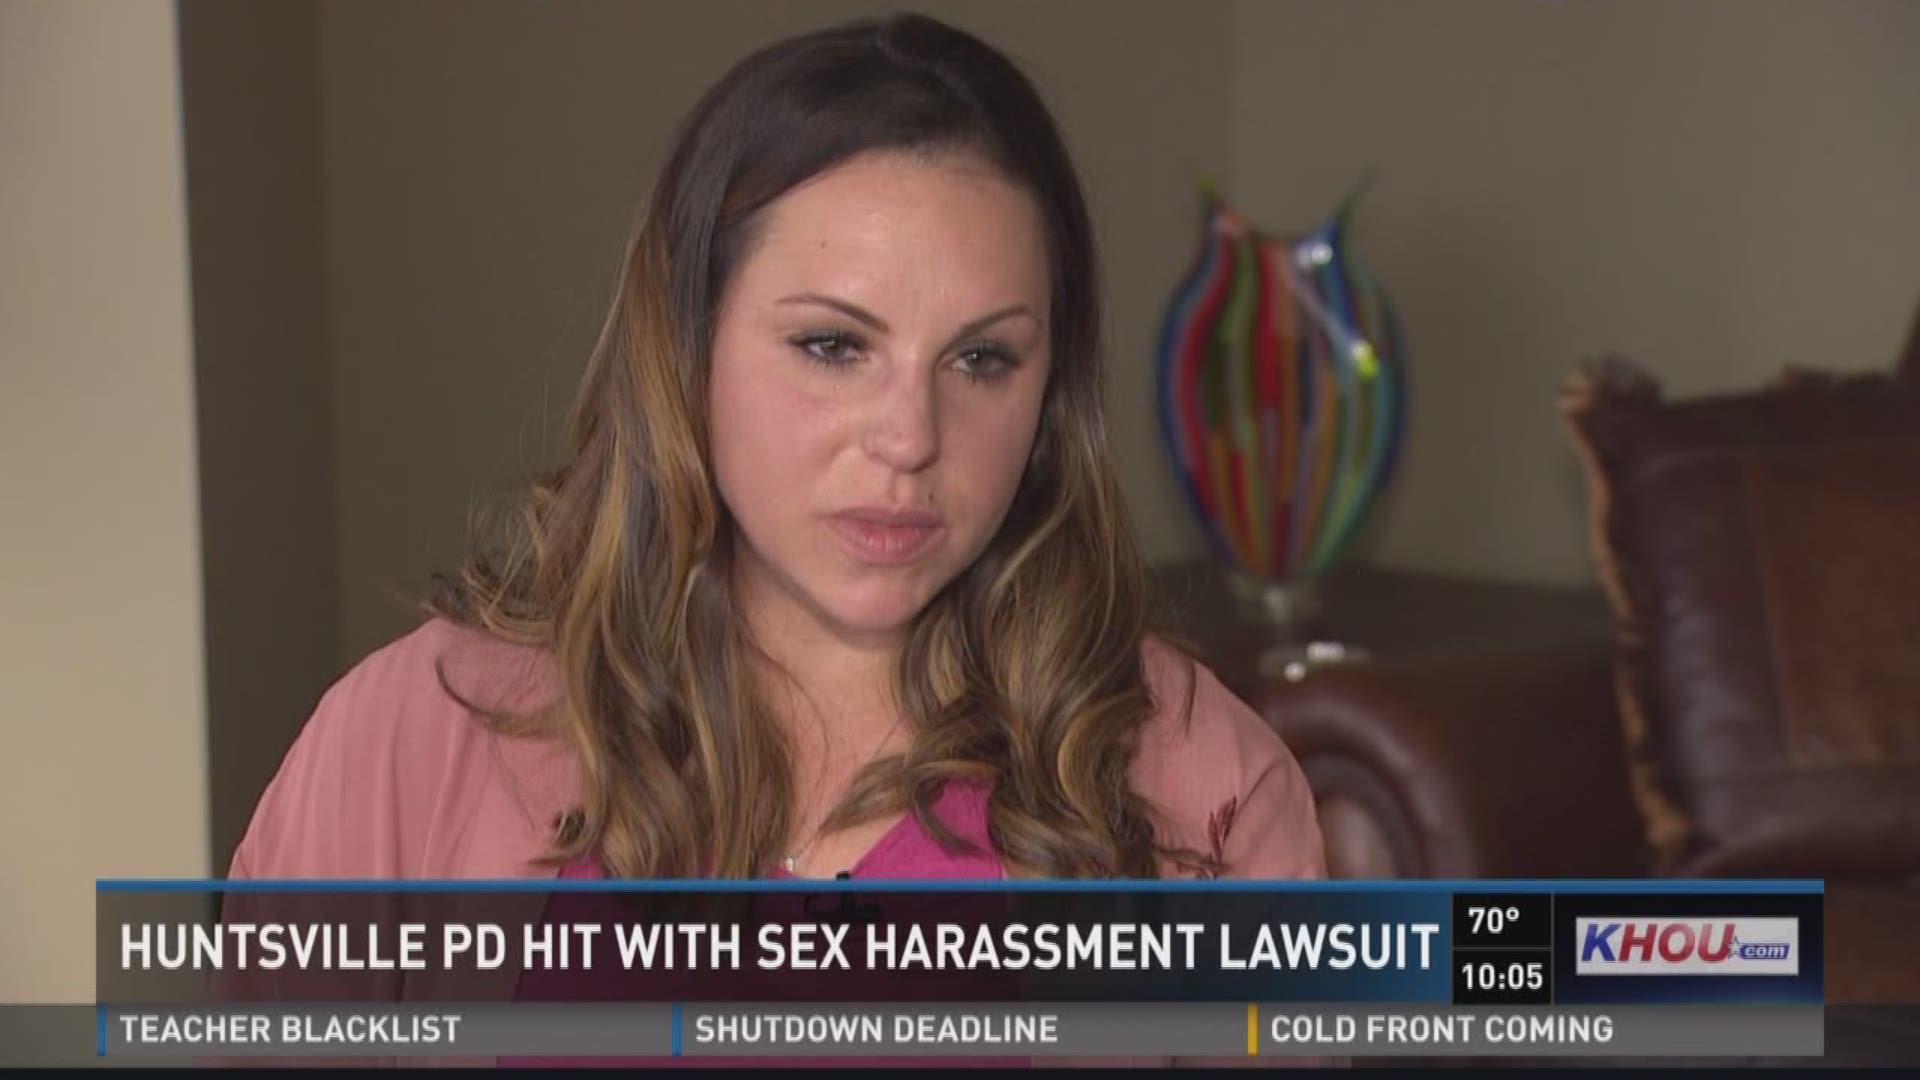 A former officer sued Huntsville Police and its chief claiming they fired a woman in retaliation for filing sexual harassment complaints.